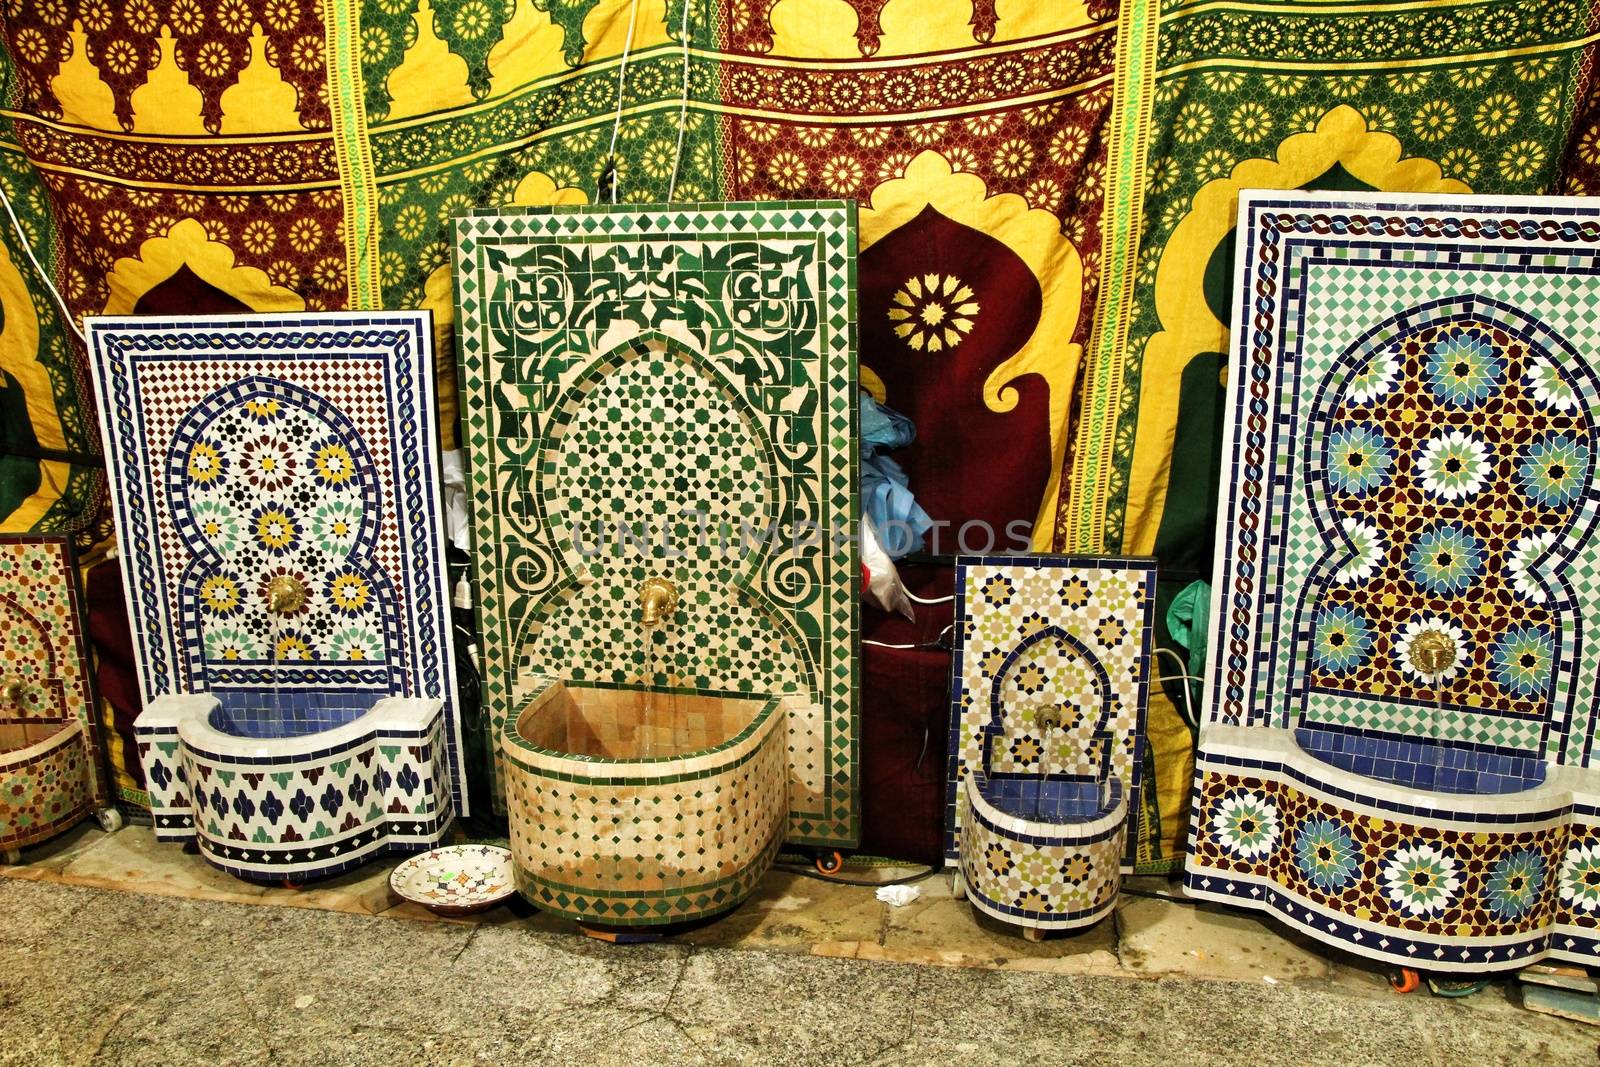 Beautiful and colorful ceramic fountains for sale at a market stall in Elche